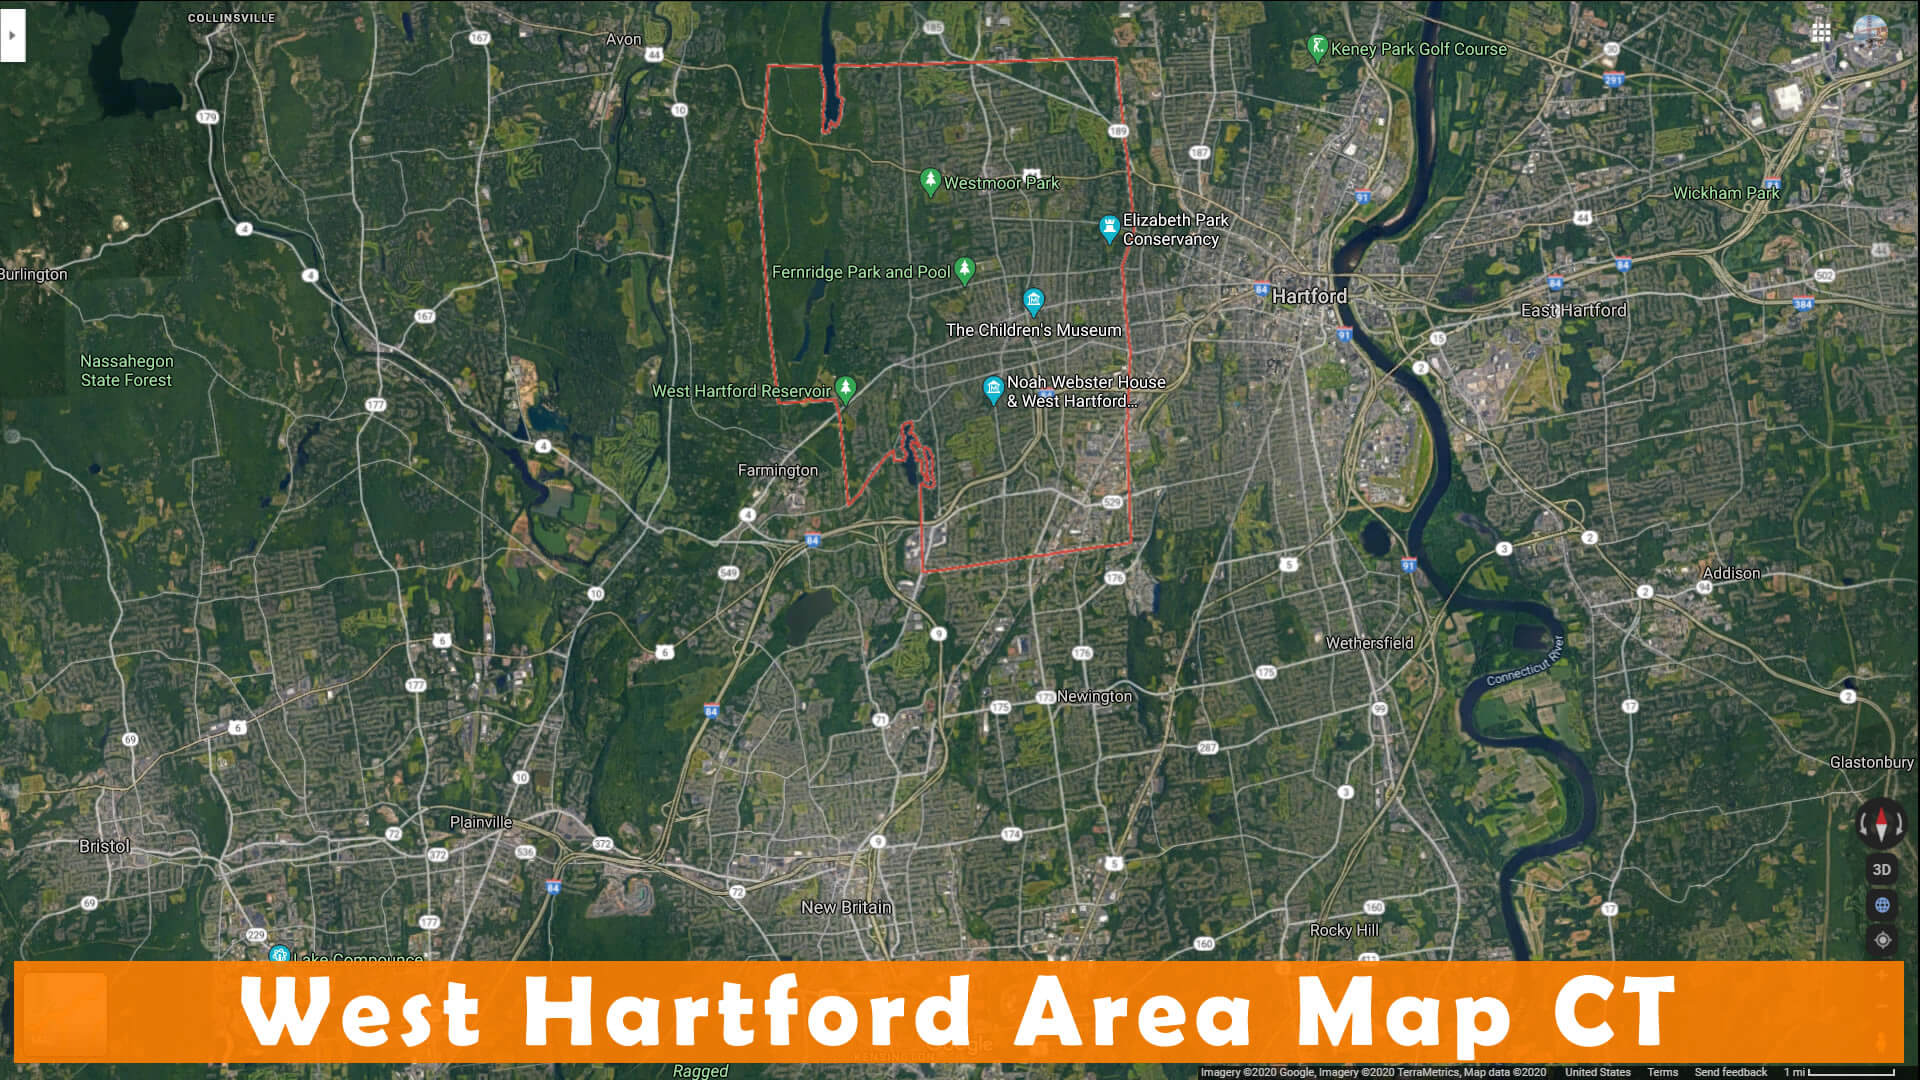 West Hartford Area Map CT